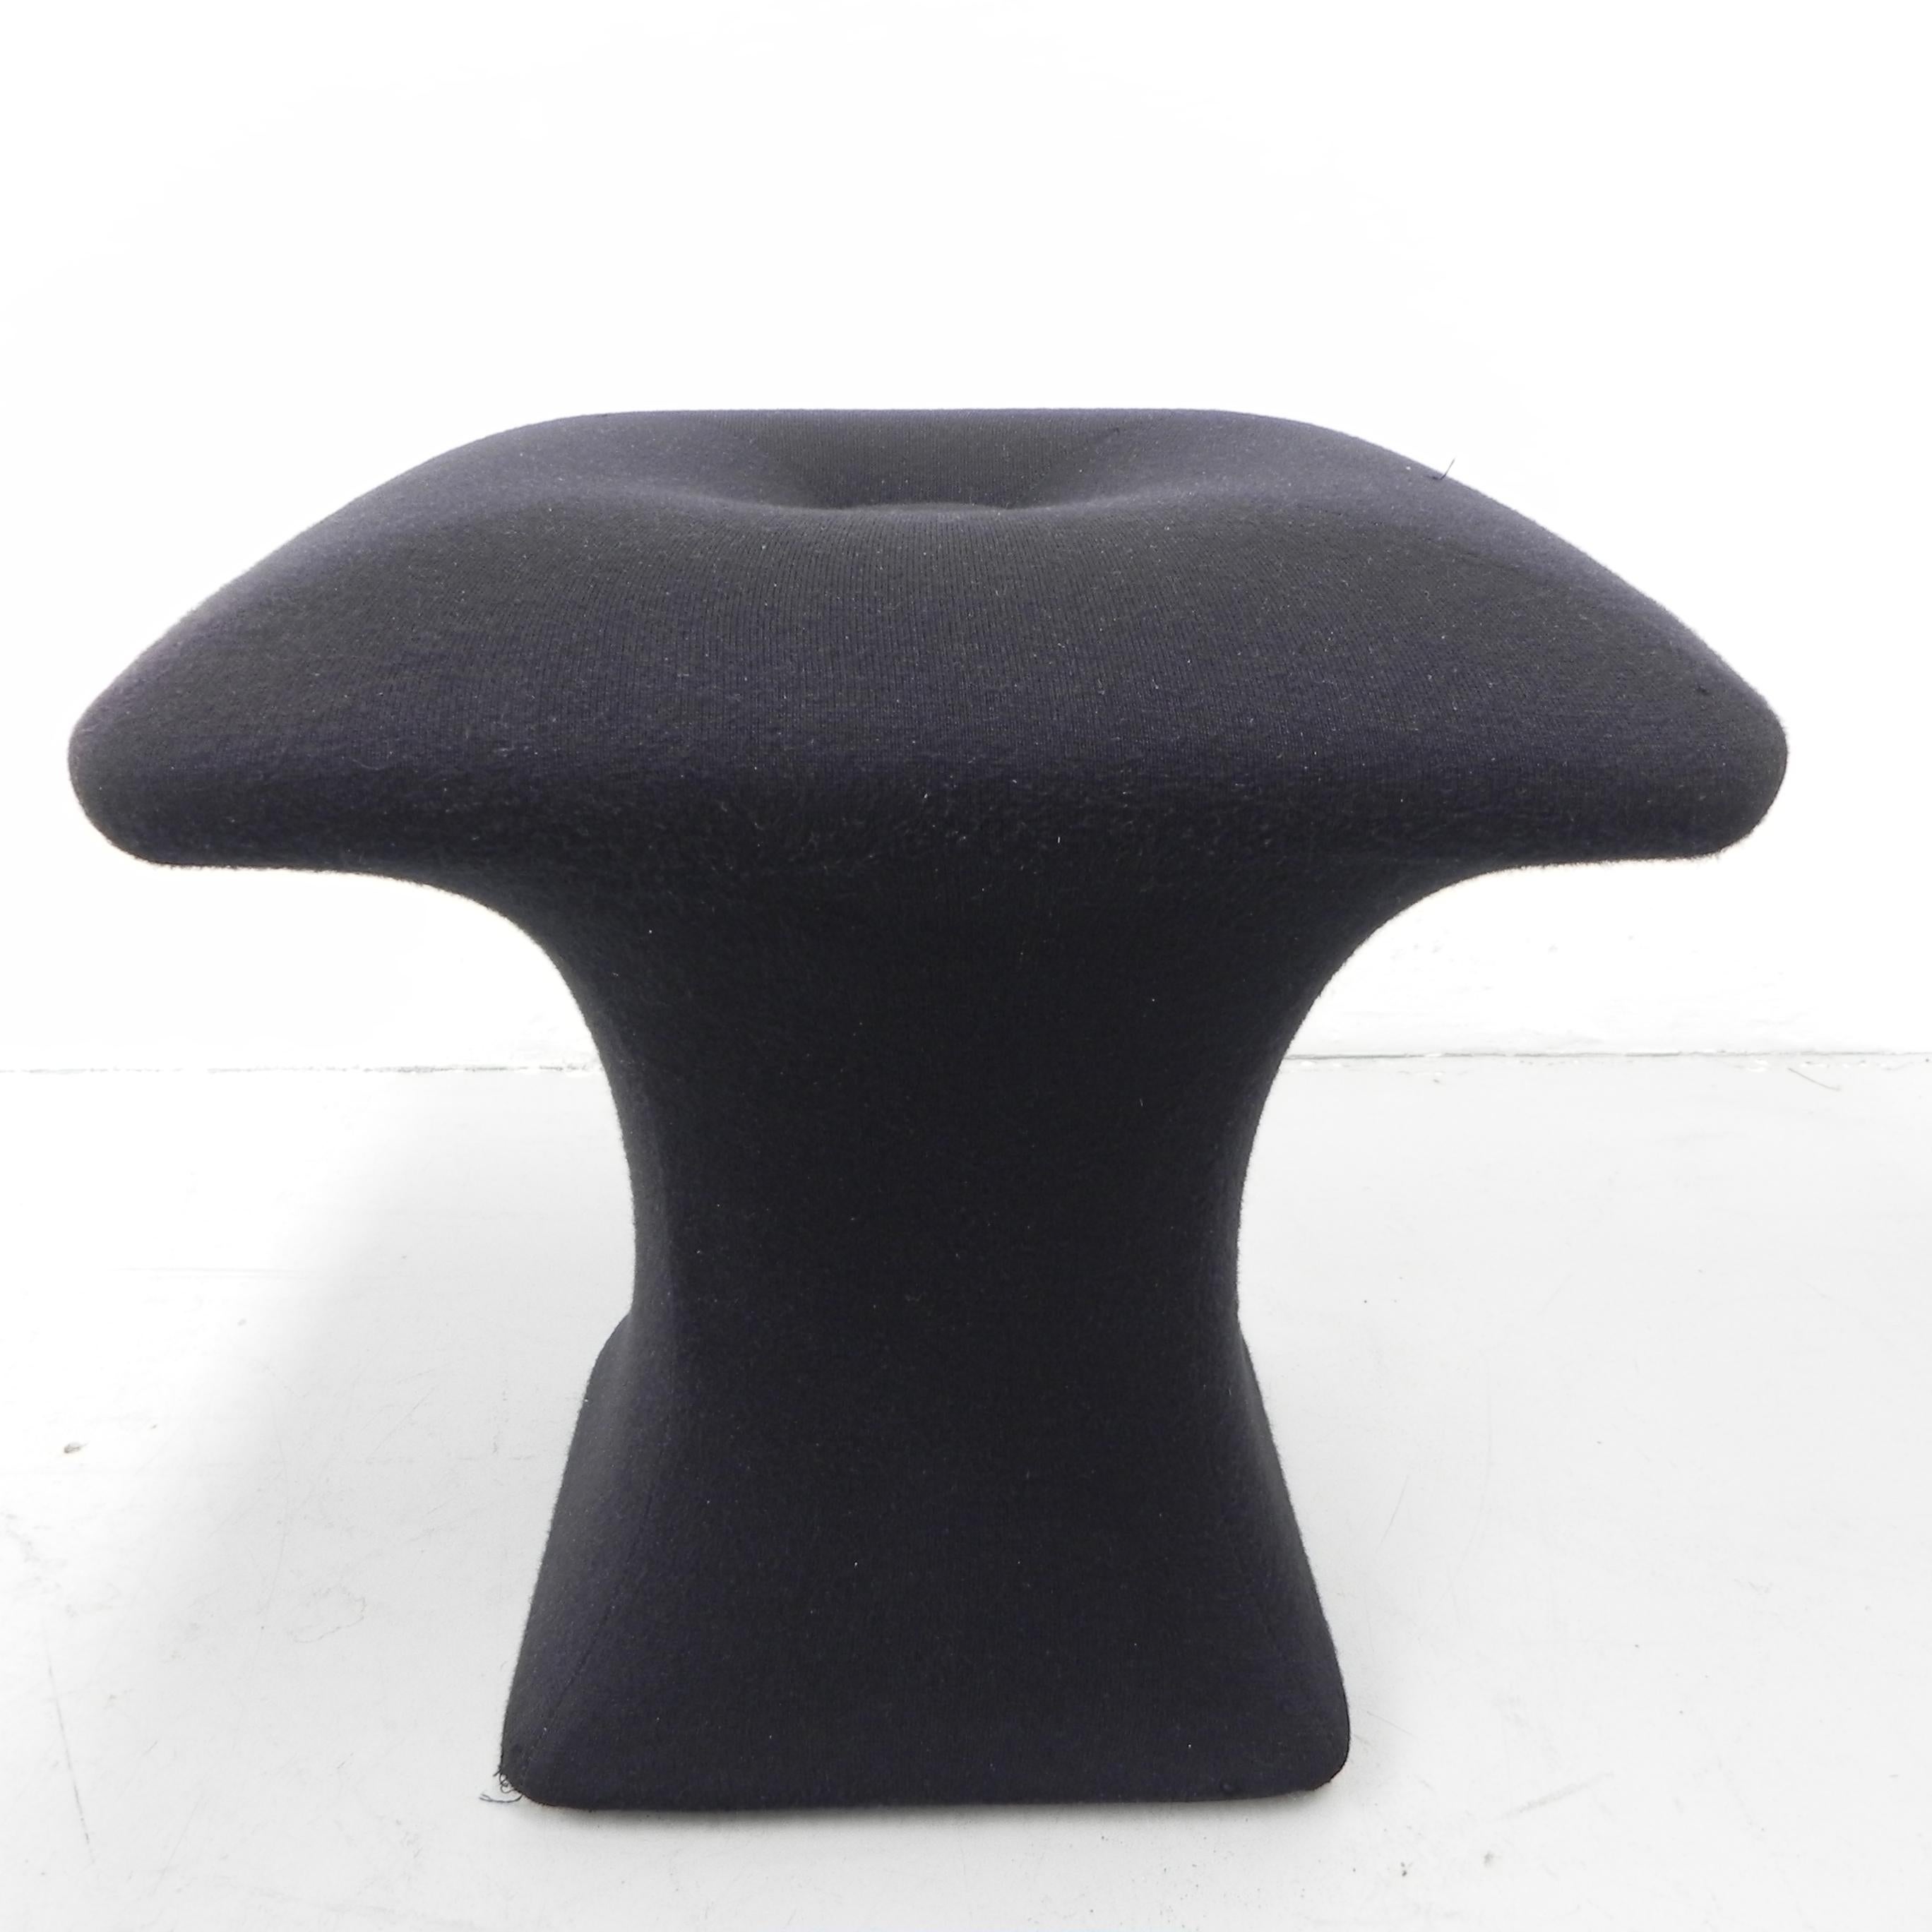 Stokking stool, ottoman, footstool by Clemens Claessen For Sale 3